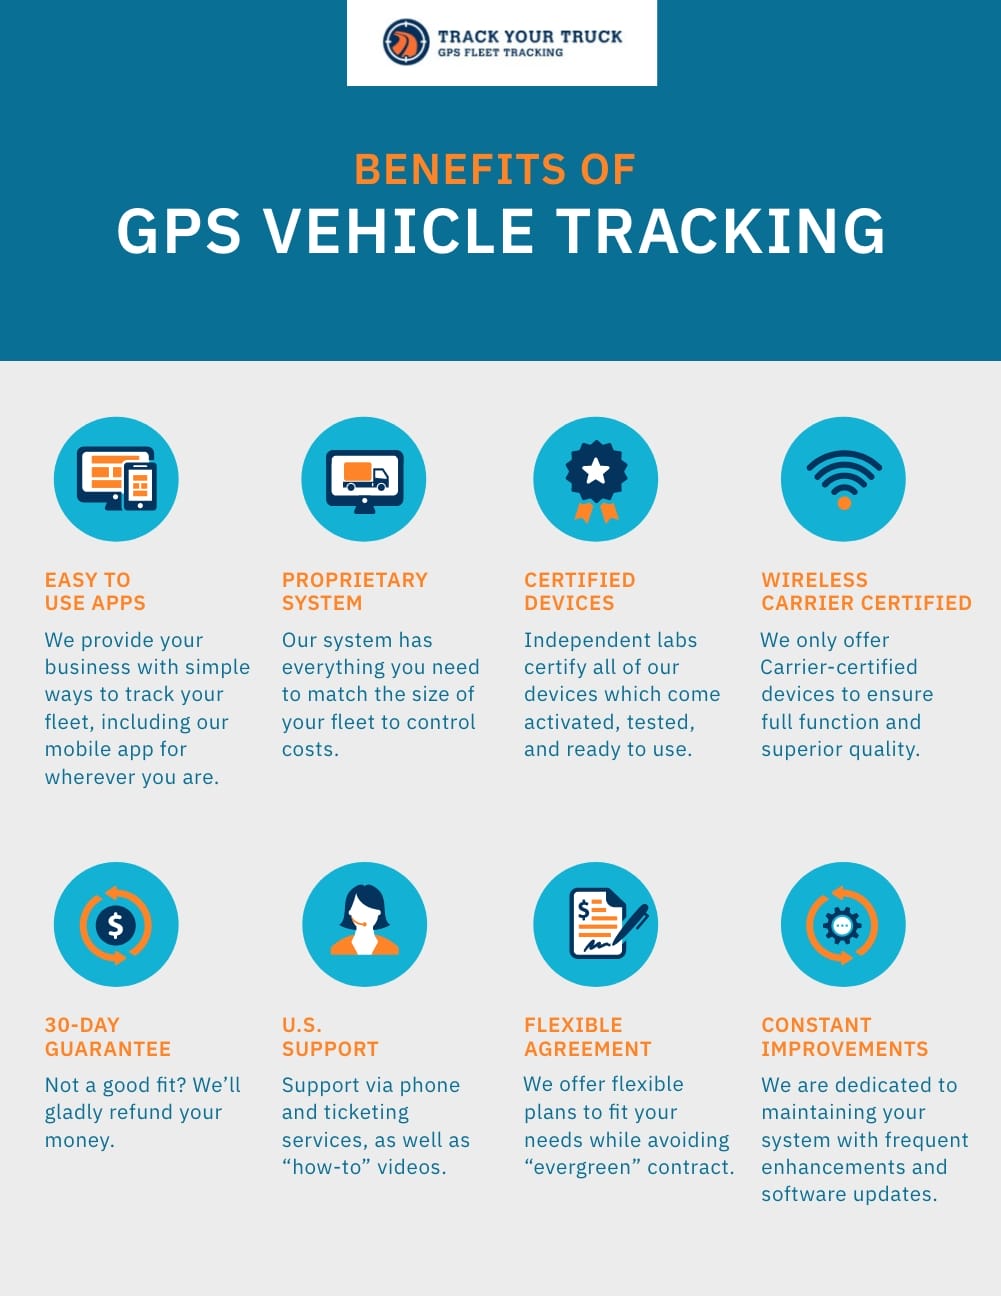 What is the Purpose of Using Location Trackers?